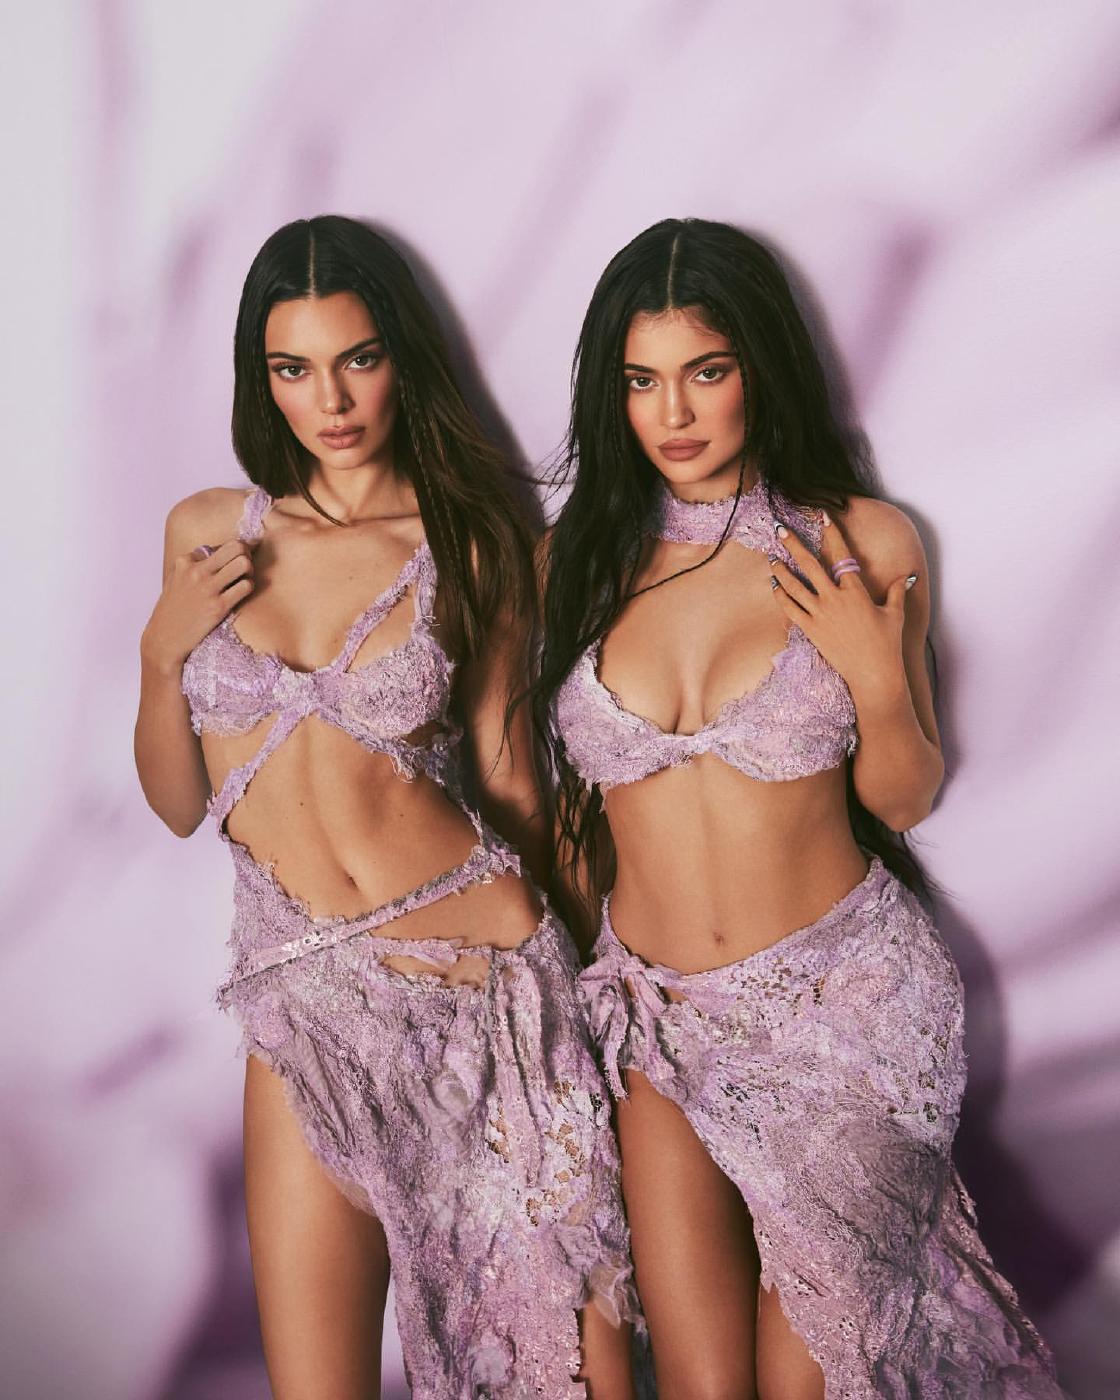 Kendall And Kylie Jenner Modeling Photoshoot Set Leaked Dpmnzx